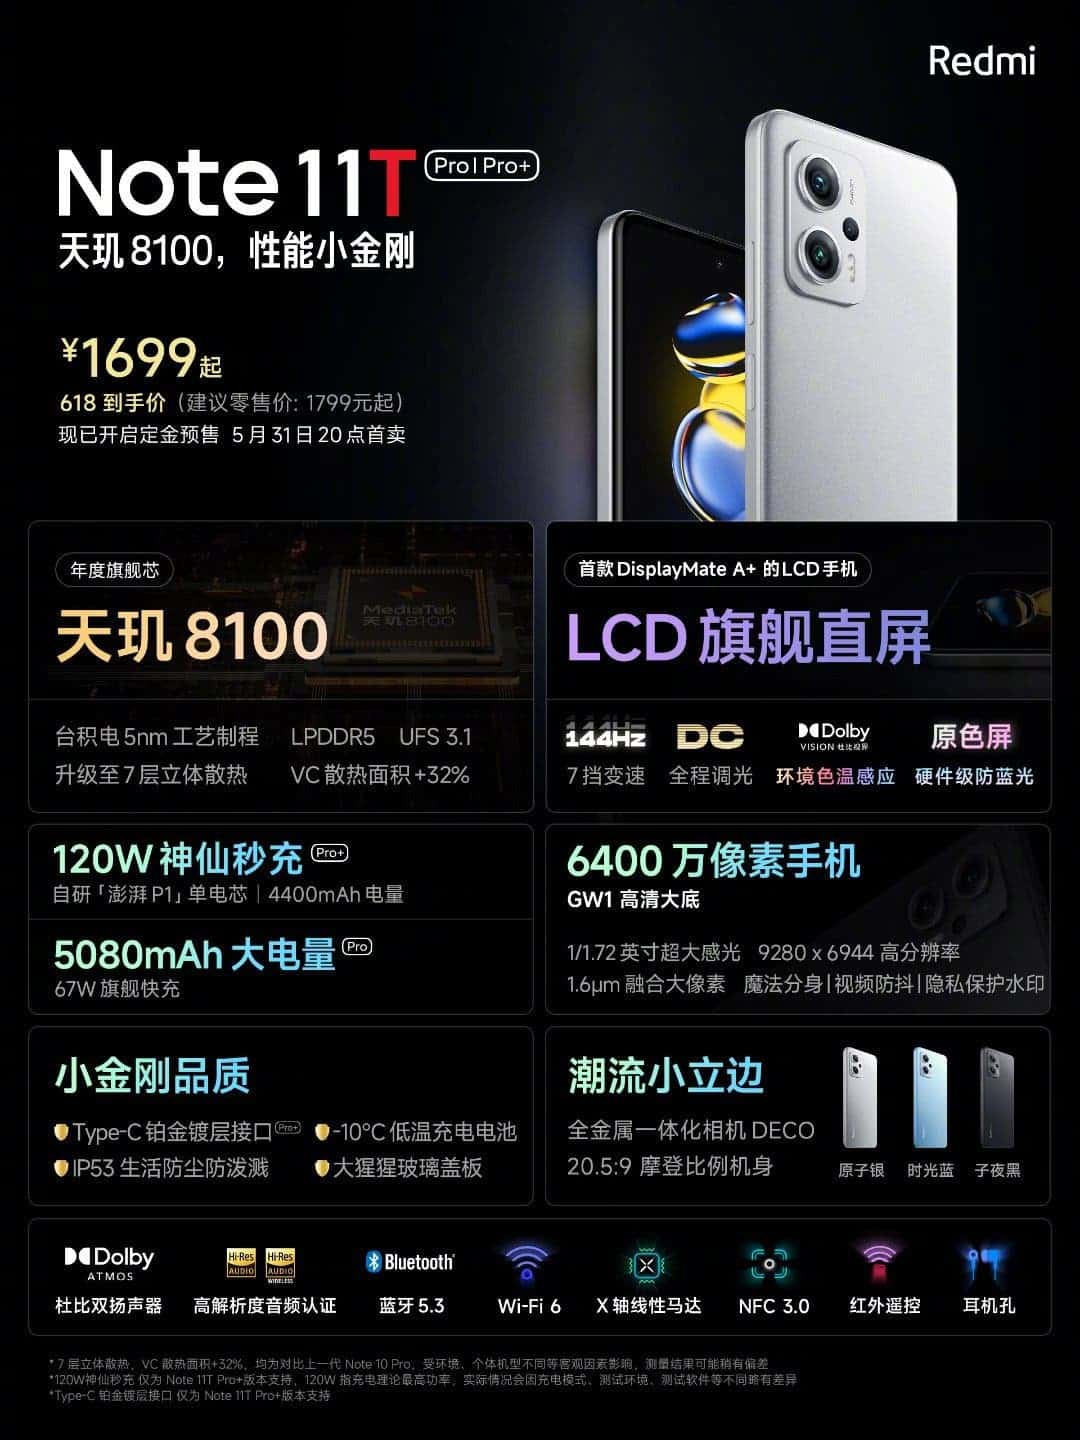 Xiaomi Redmi Note 11T Pro - Full phone specifications